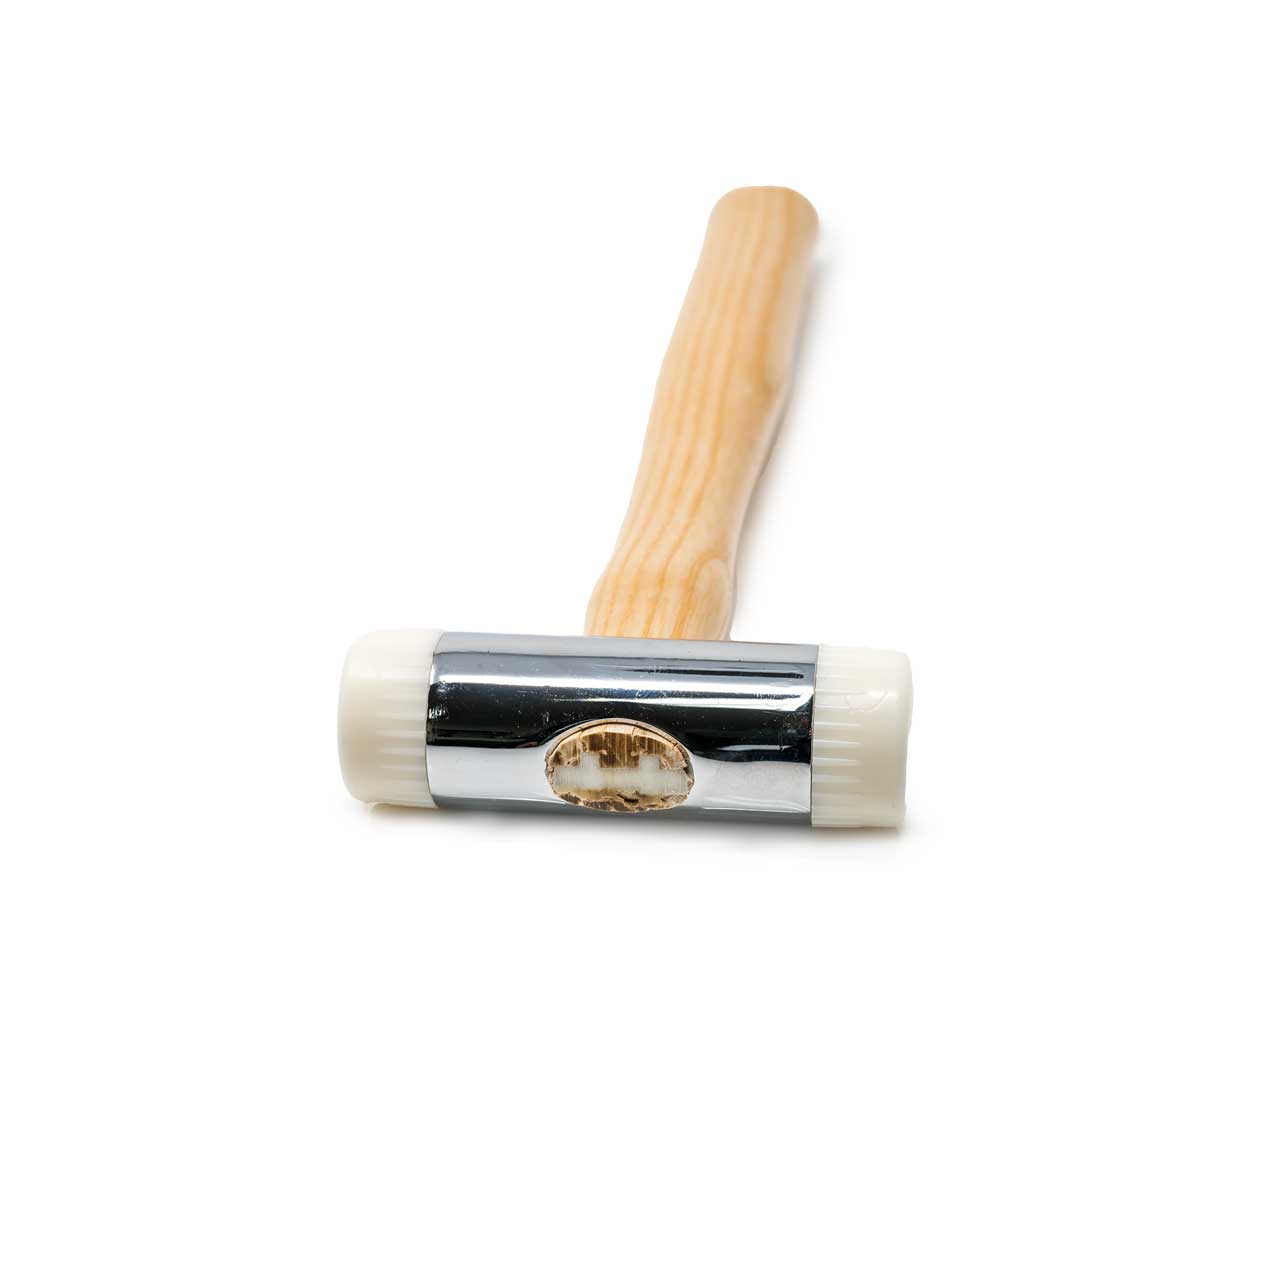 Leader Spout Hammer with Wooden Handle